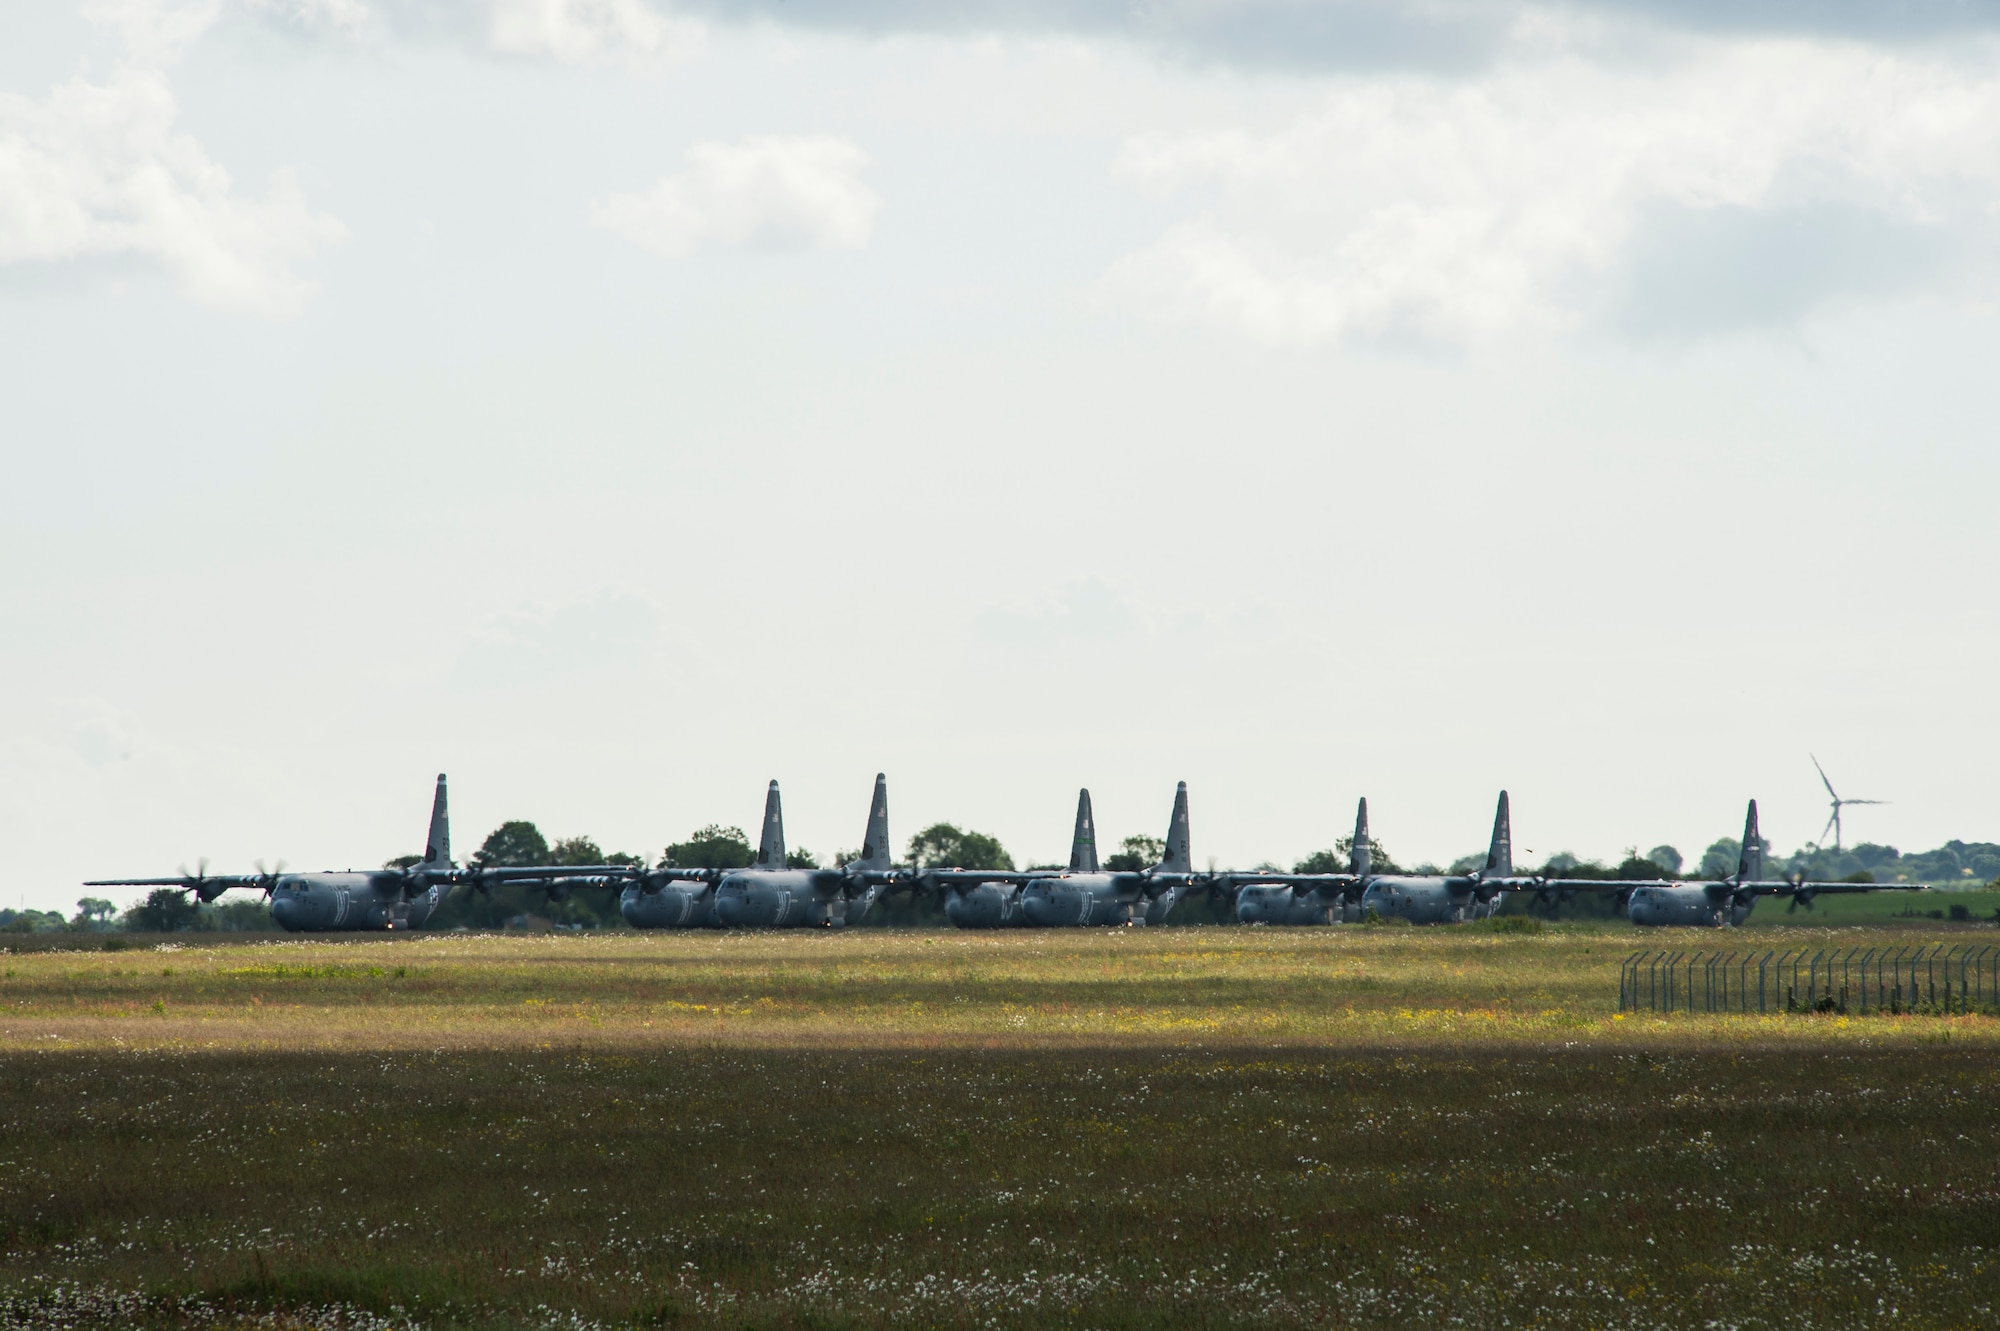 An eight-ship formation of U.S. Air Force C-130J Super Hercules stages on the runway of Cherbourg-Maupertus Airport, France, June 6, 2019. The aircraft are assigned to the 37th Airlift Squadron, 39th AS, 41st AS, 61st AS, and 62nd AS. The 37th, 61st, and 62nd are legacy squadrons of Troop Carrier Squadrons who conducted personnel drops during Operation Neptune June 6, 1944. (U.S. Air Force photo by Senior Airman Devin M. Rumbaugh)